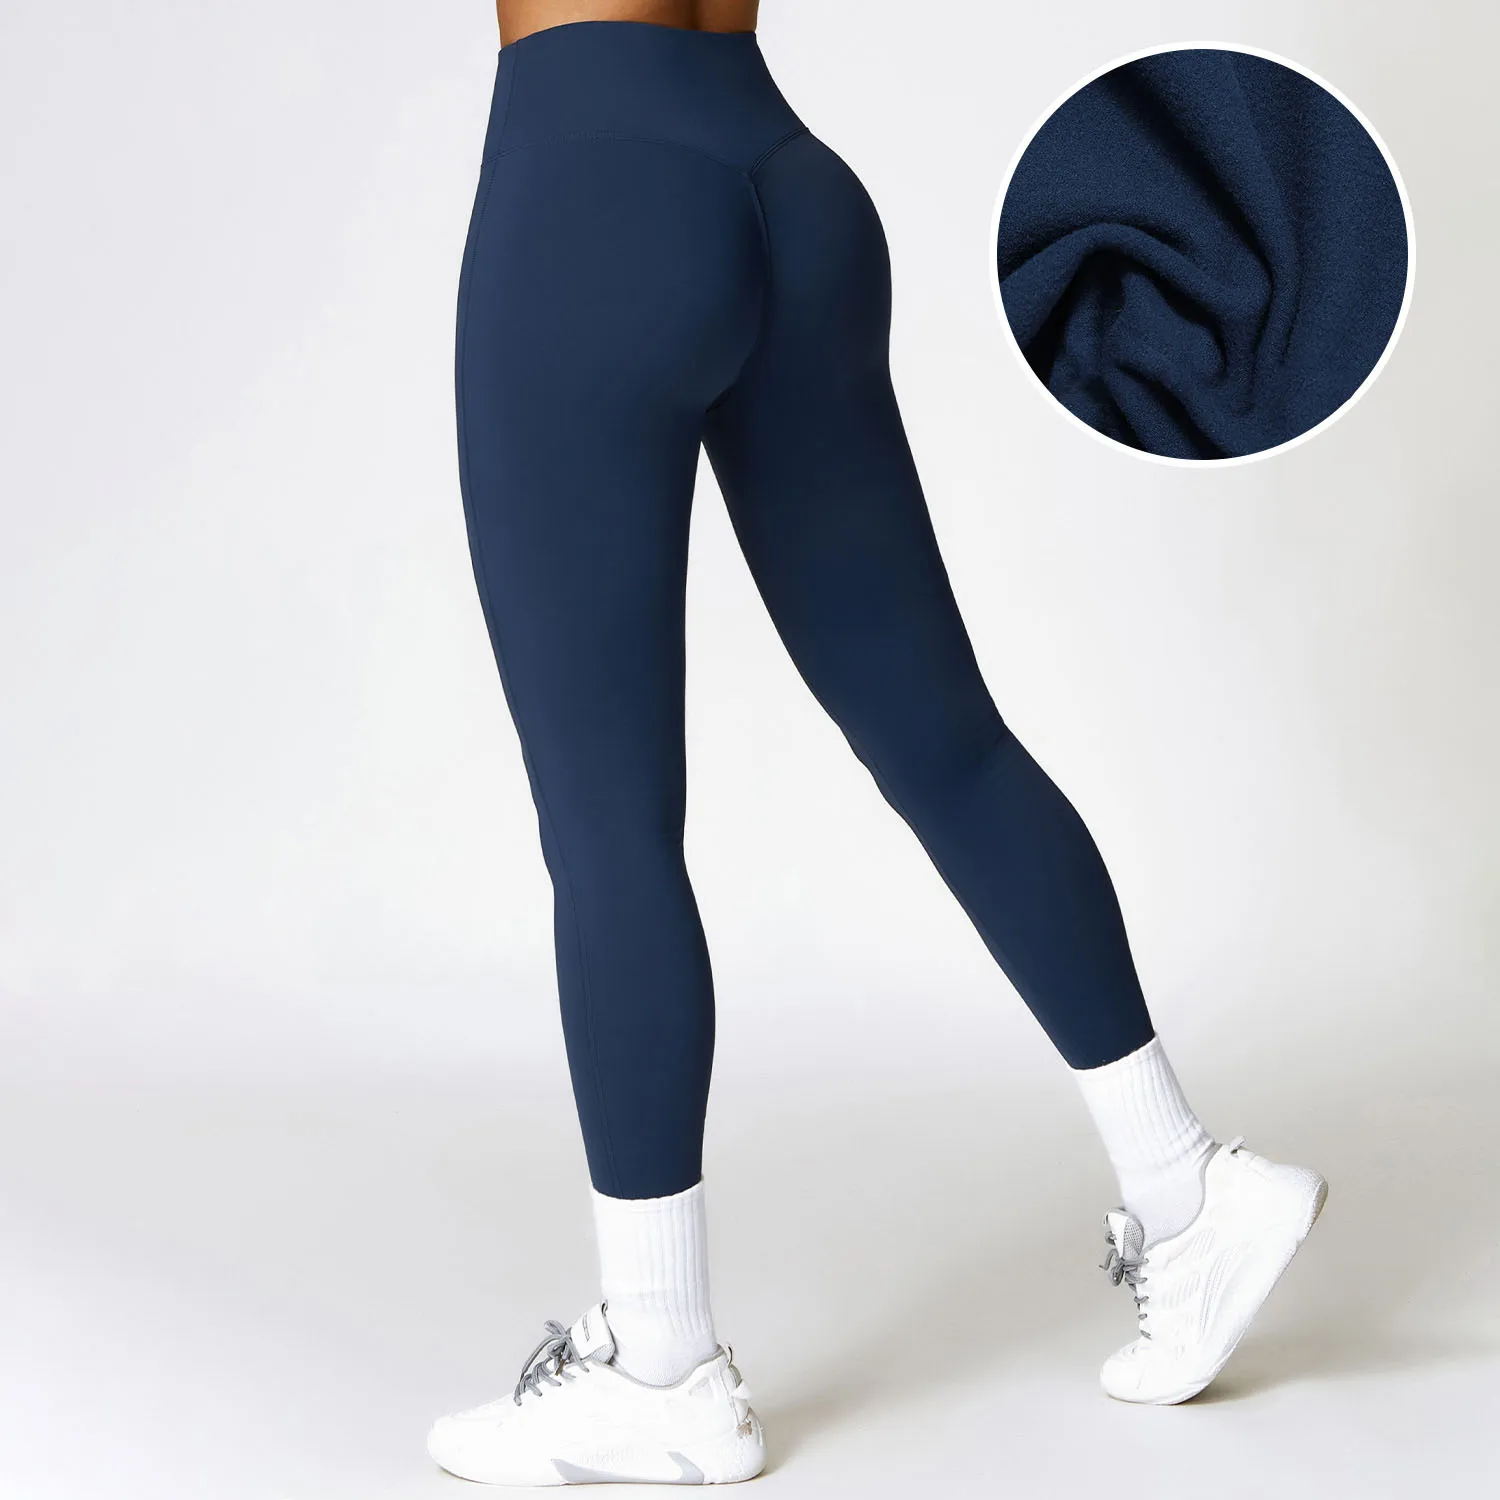 YIYI High Waist Comfortable Workout Leggings Girls With Fleece Butt Lift Tights Pants Ladies Warm Leggings Women Extremely Thick